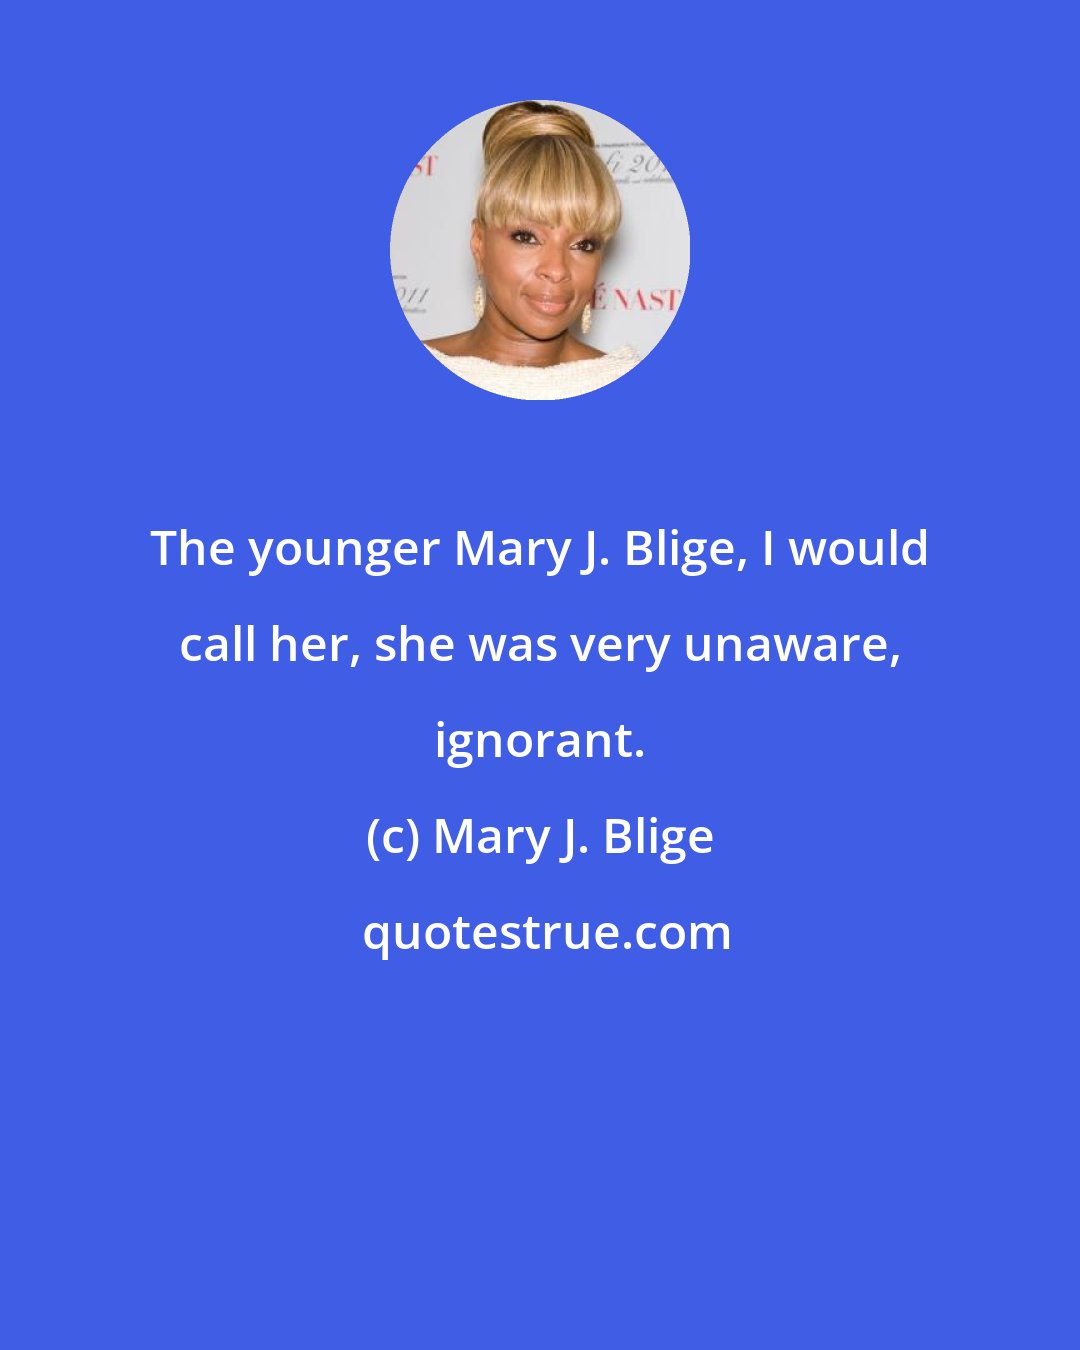 Mary J. Blige: The younger Mary J. Blige, I would call her, she was very unaware, ignorant.